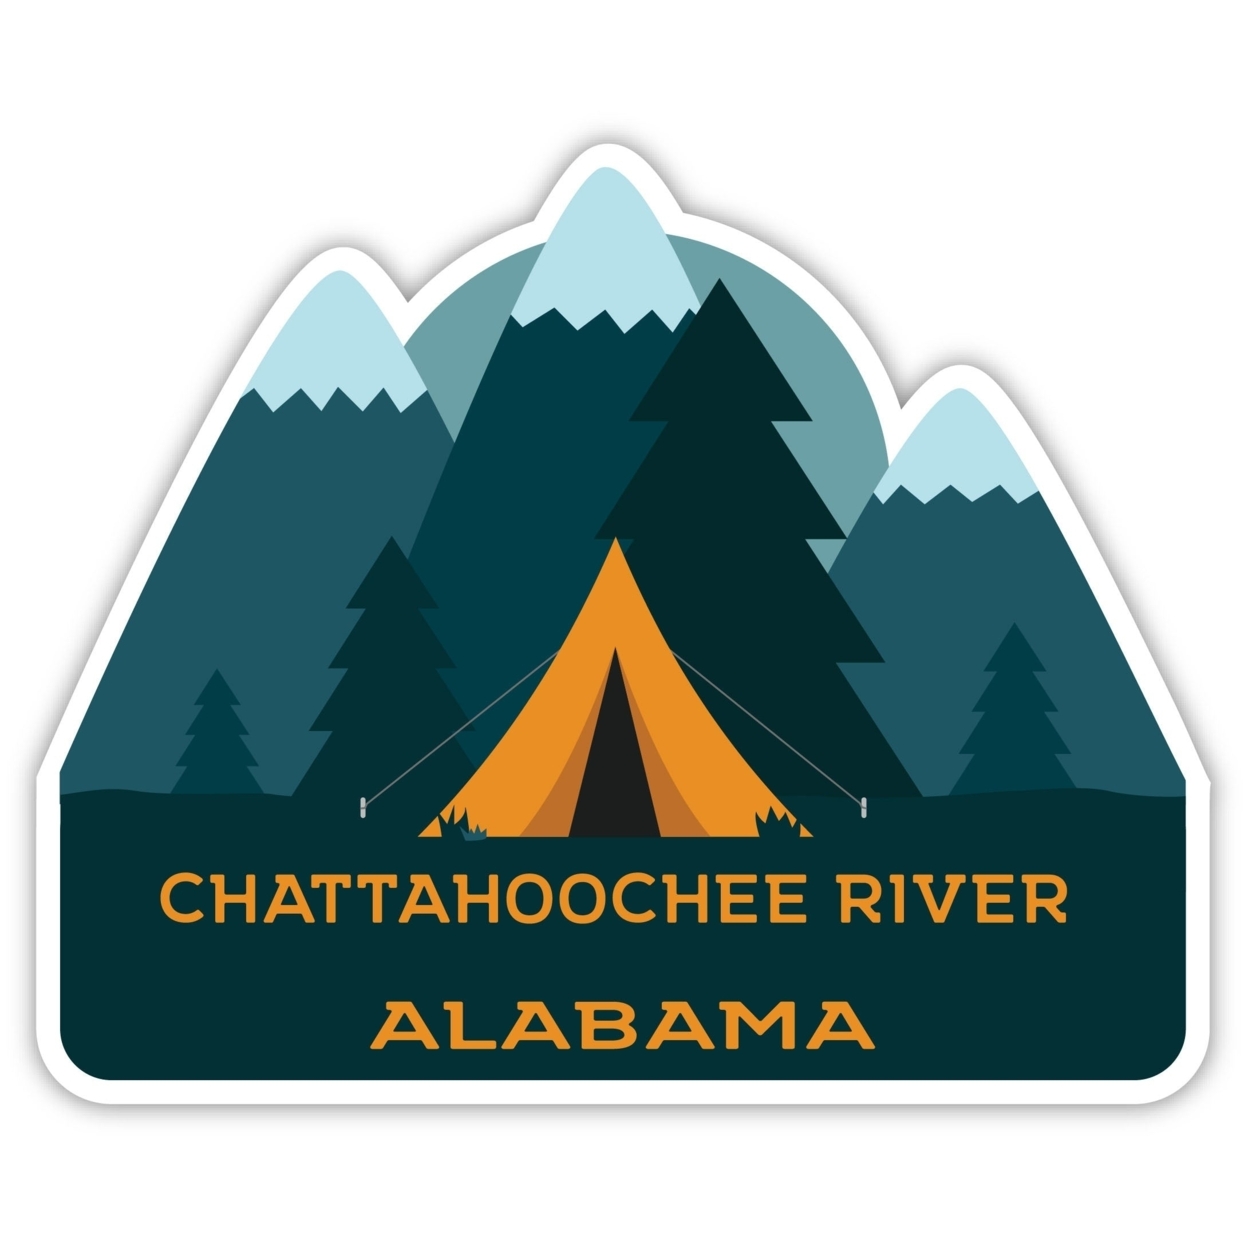 Chattahoochee River Alabama Souvenir Decorative Stickers (Choose Theme And Size) - 4-Pack, 4-Inch, Tent